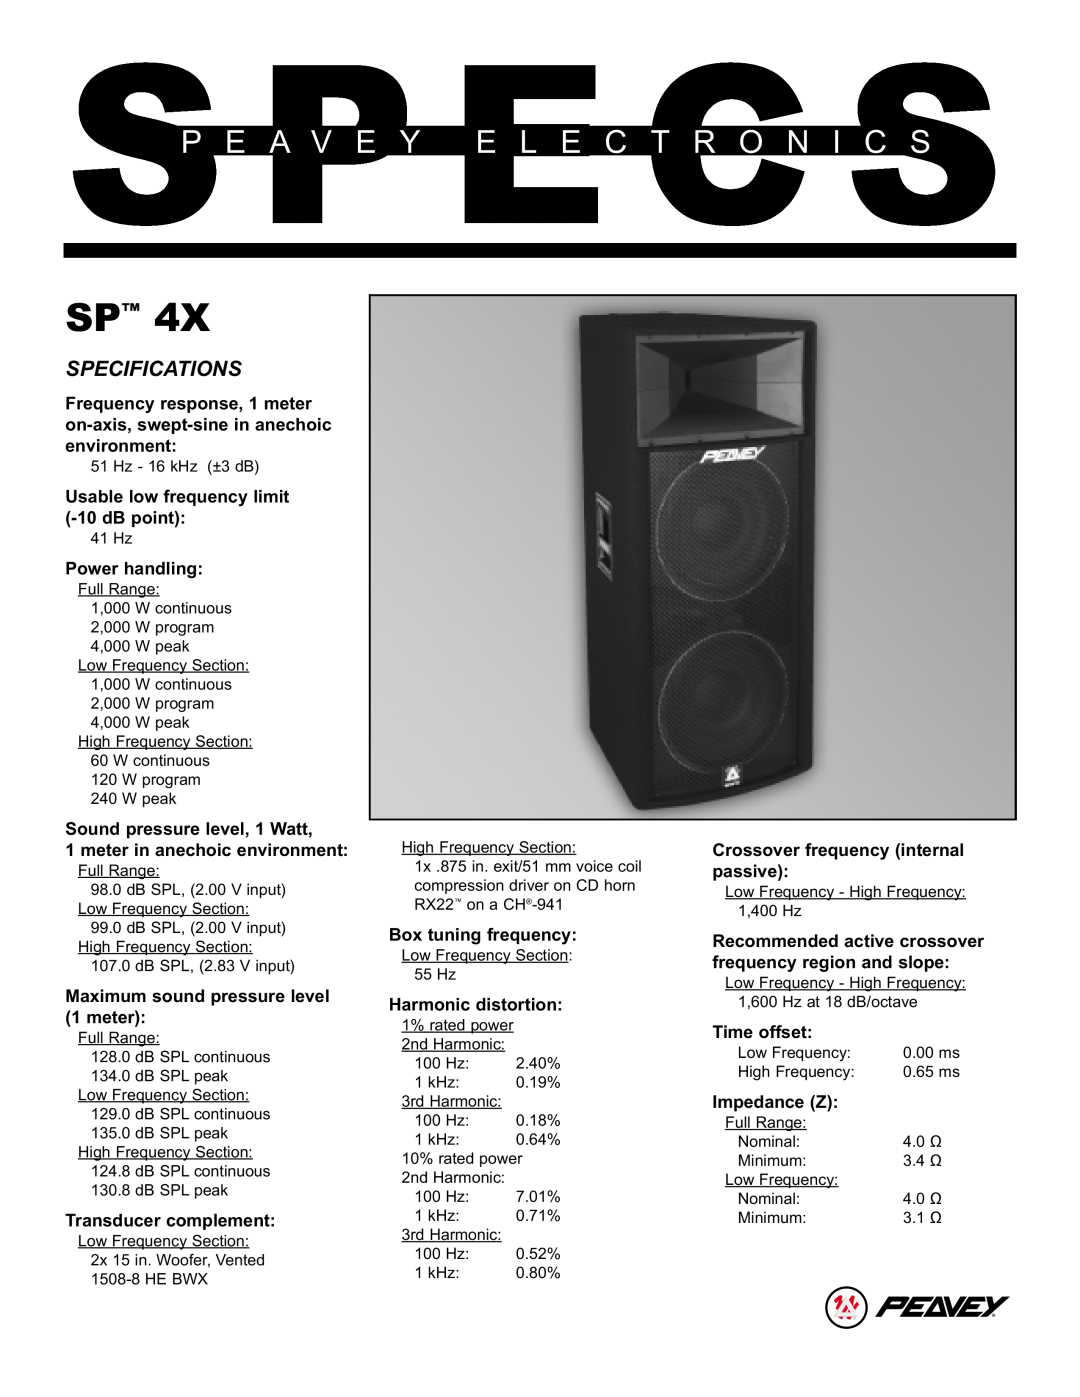 Peavey 4X specifications Specifications 